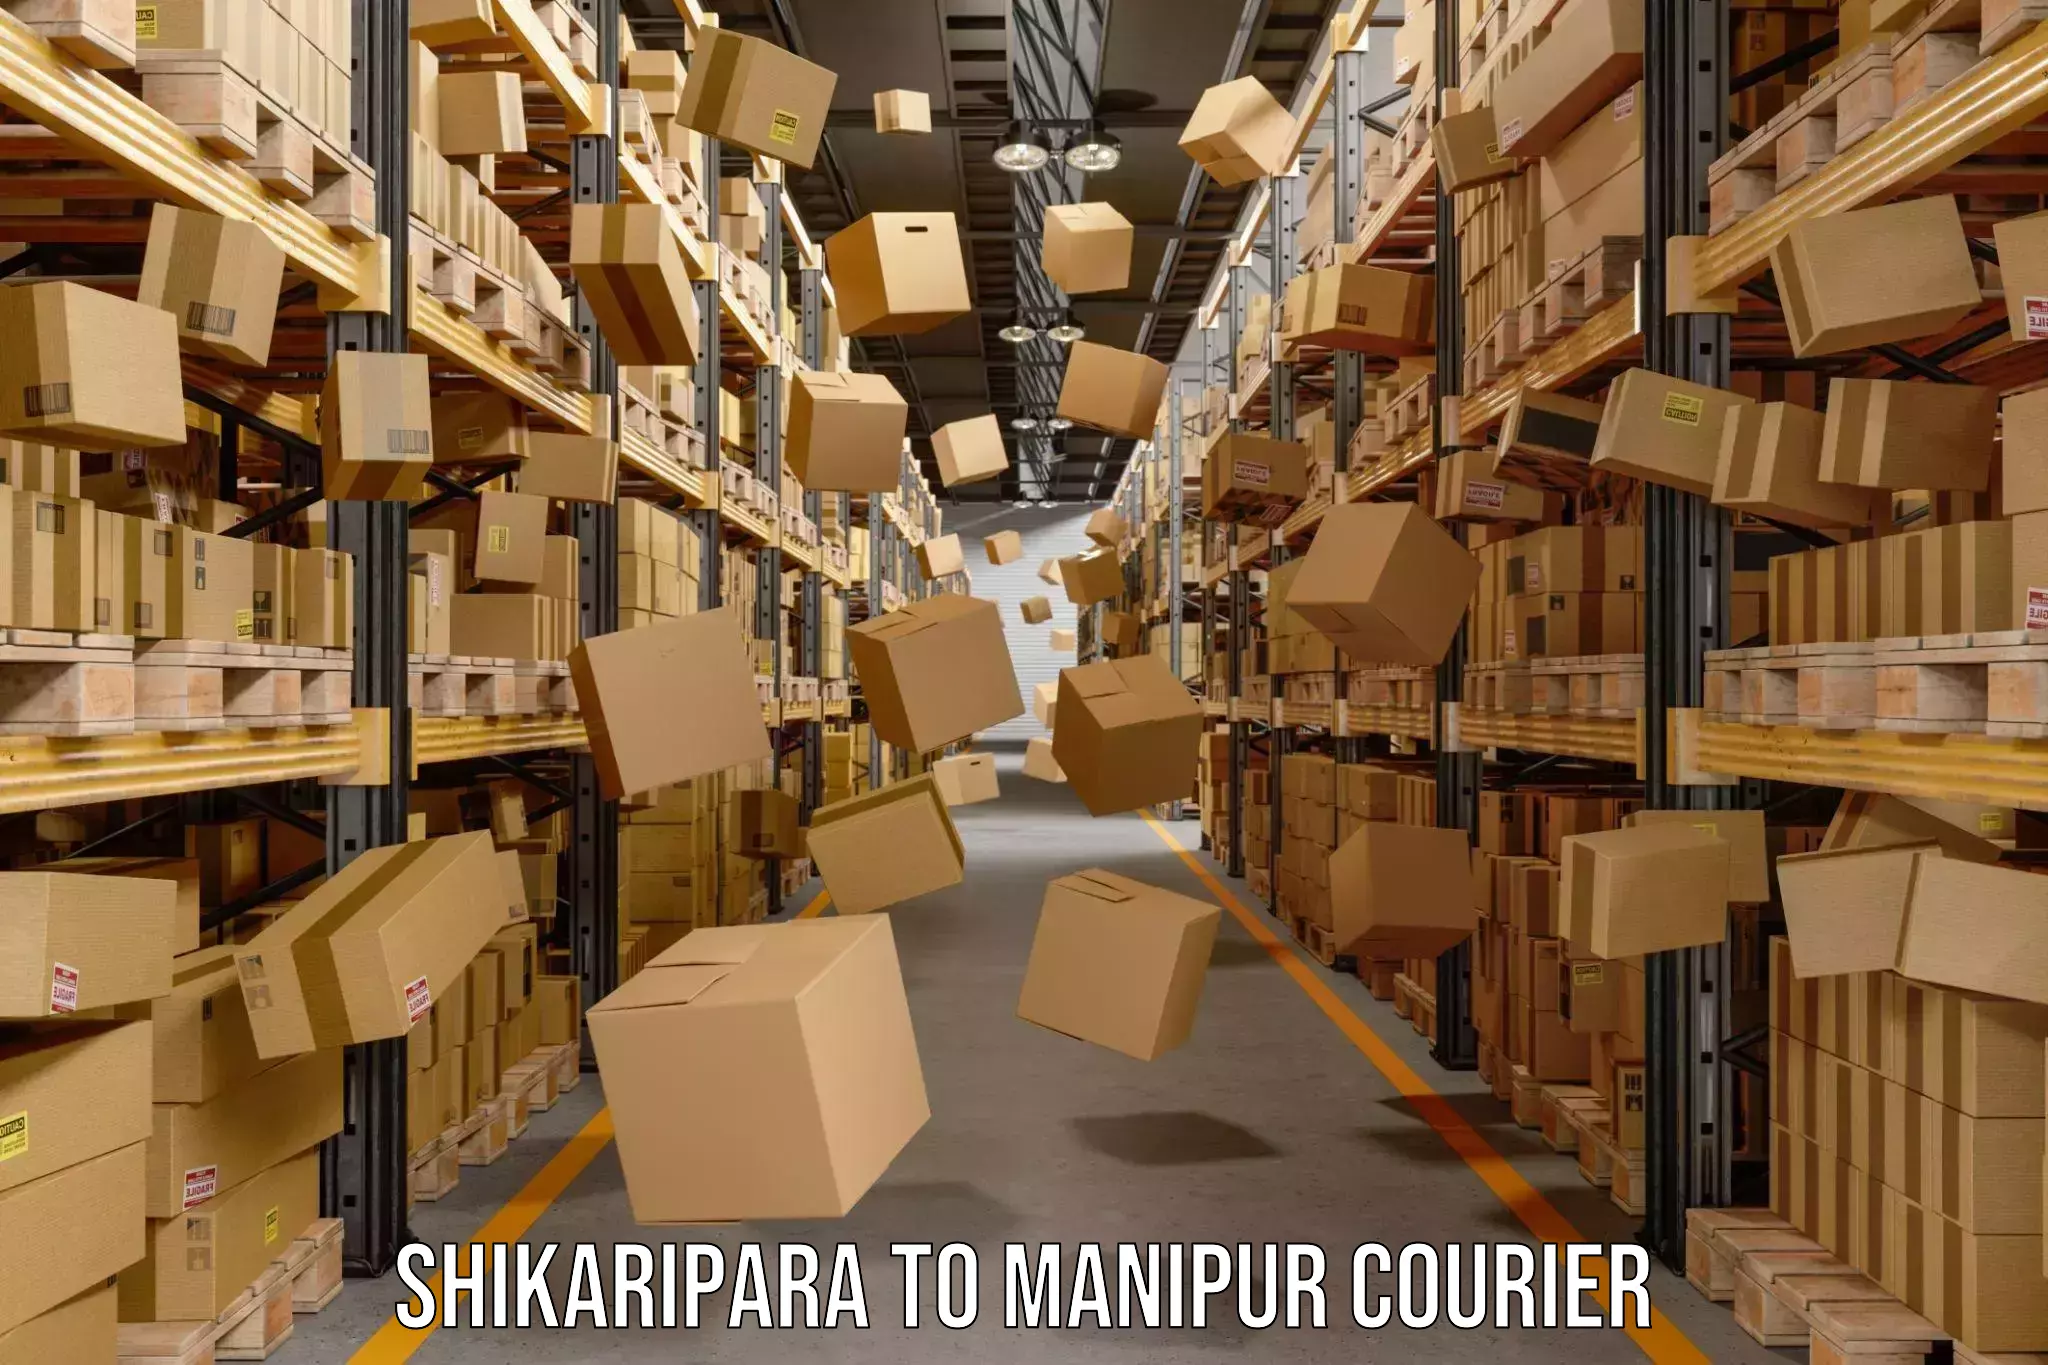 State-of-the-art courier technology Shikaripara to Kanti